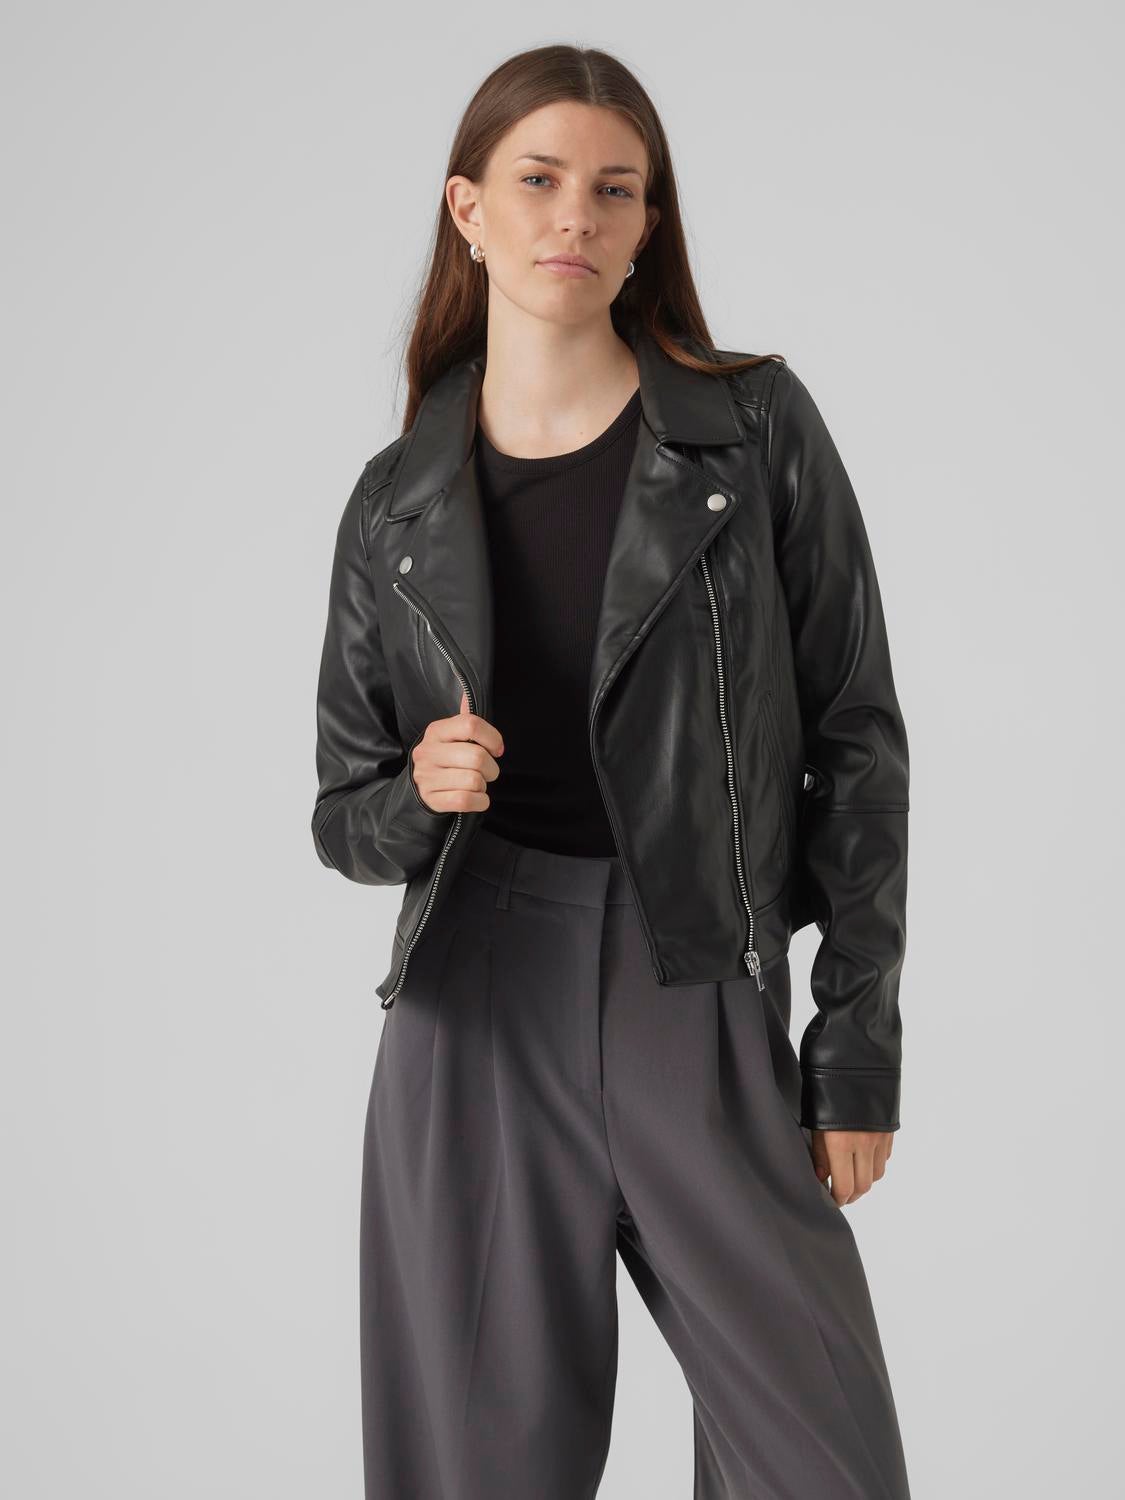 Buy Vero Moda Jackets Online At Best Price Offers In India